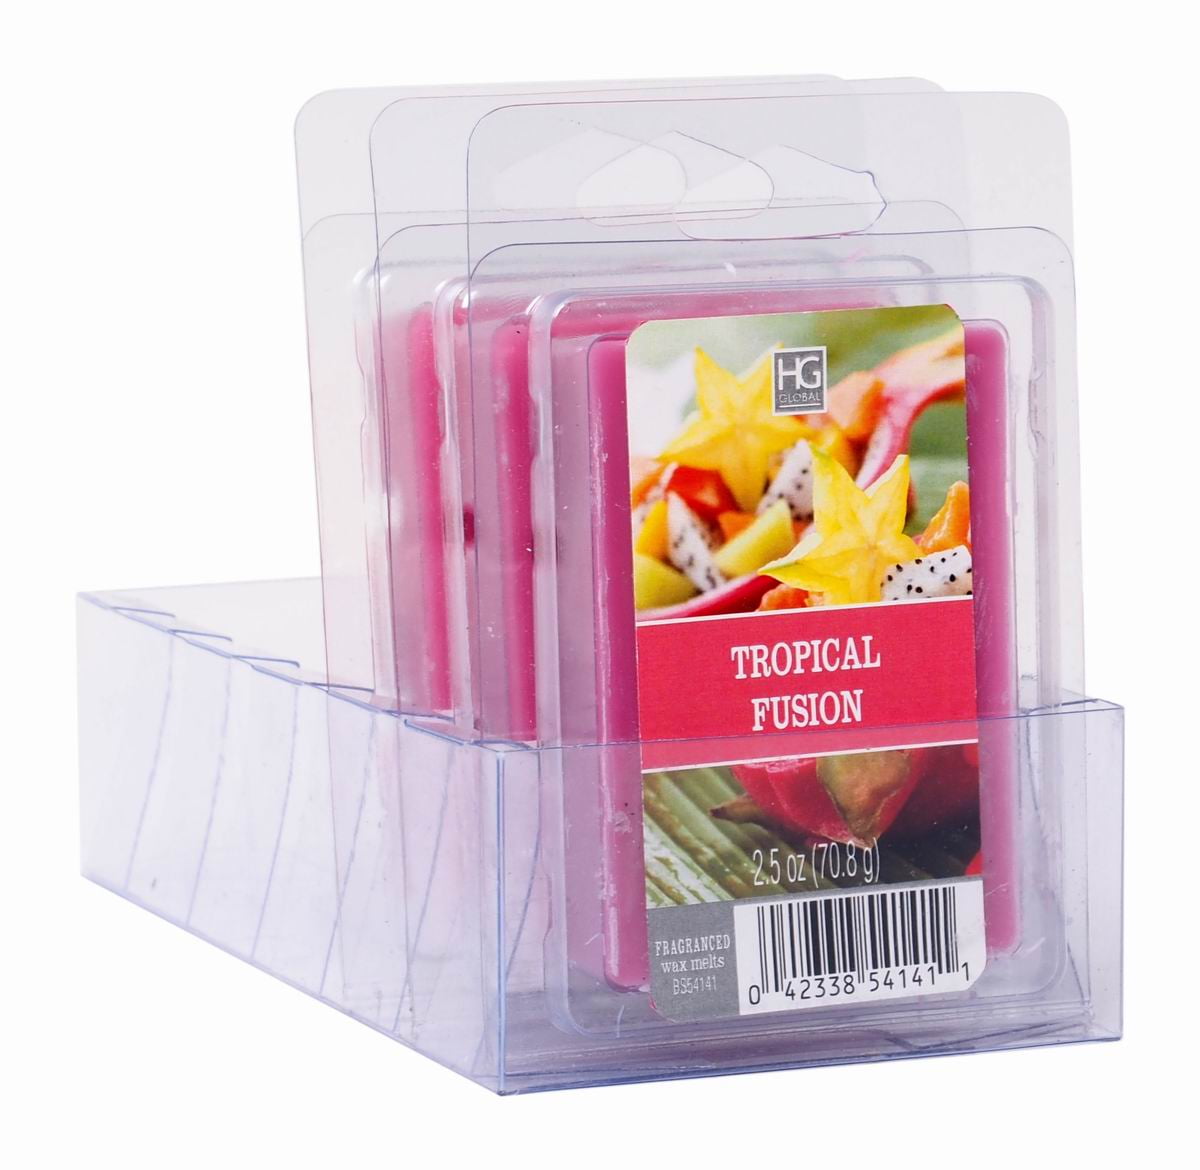 Fusion Happy Day Scented Wax Cubes (2.5 oz)